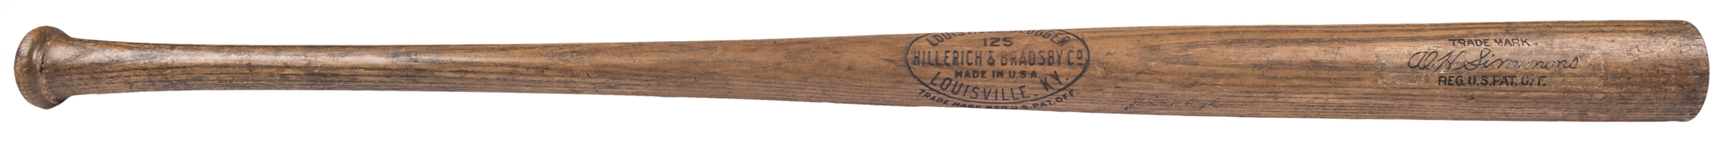 1933-34 Al Simmons Game Used Hillerich & Bradsby Pre Model Bat Signed By Simmons, Dykes & Haas (PSA/DNA GU 9.5 & Beckett)